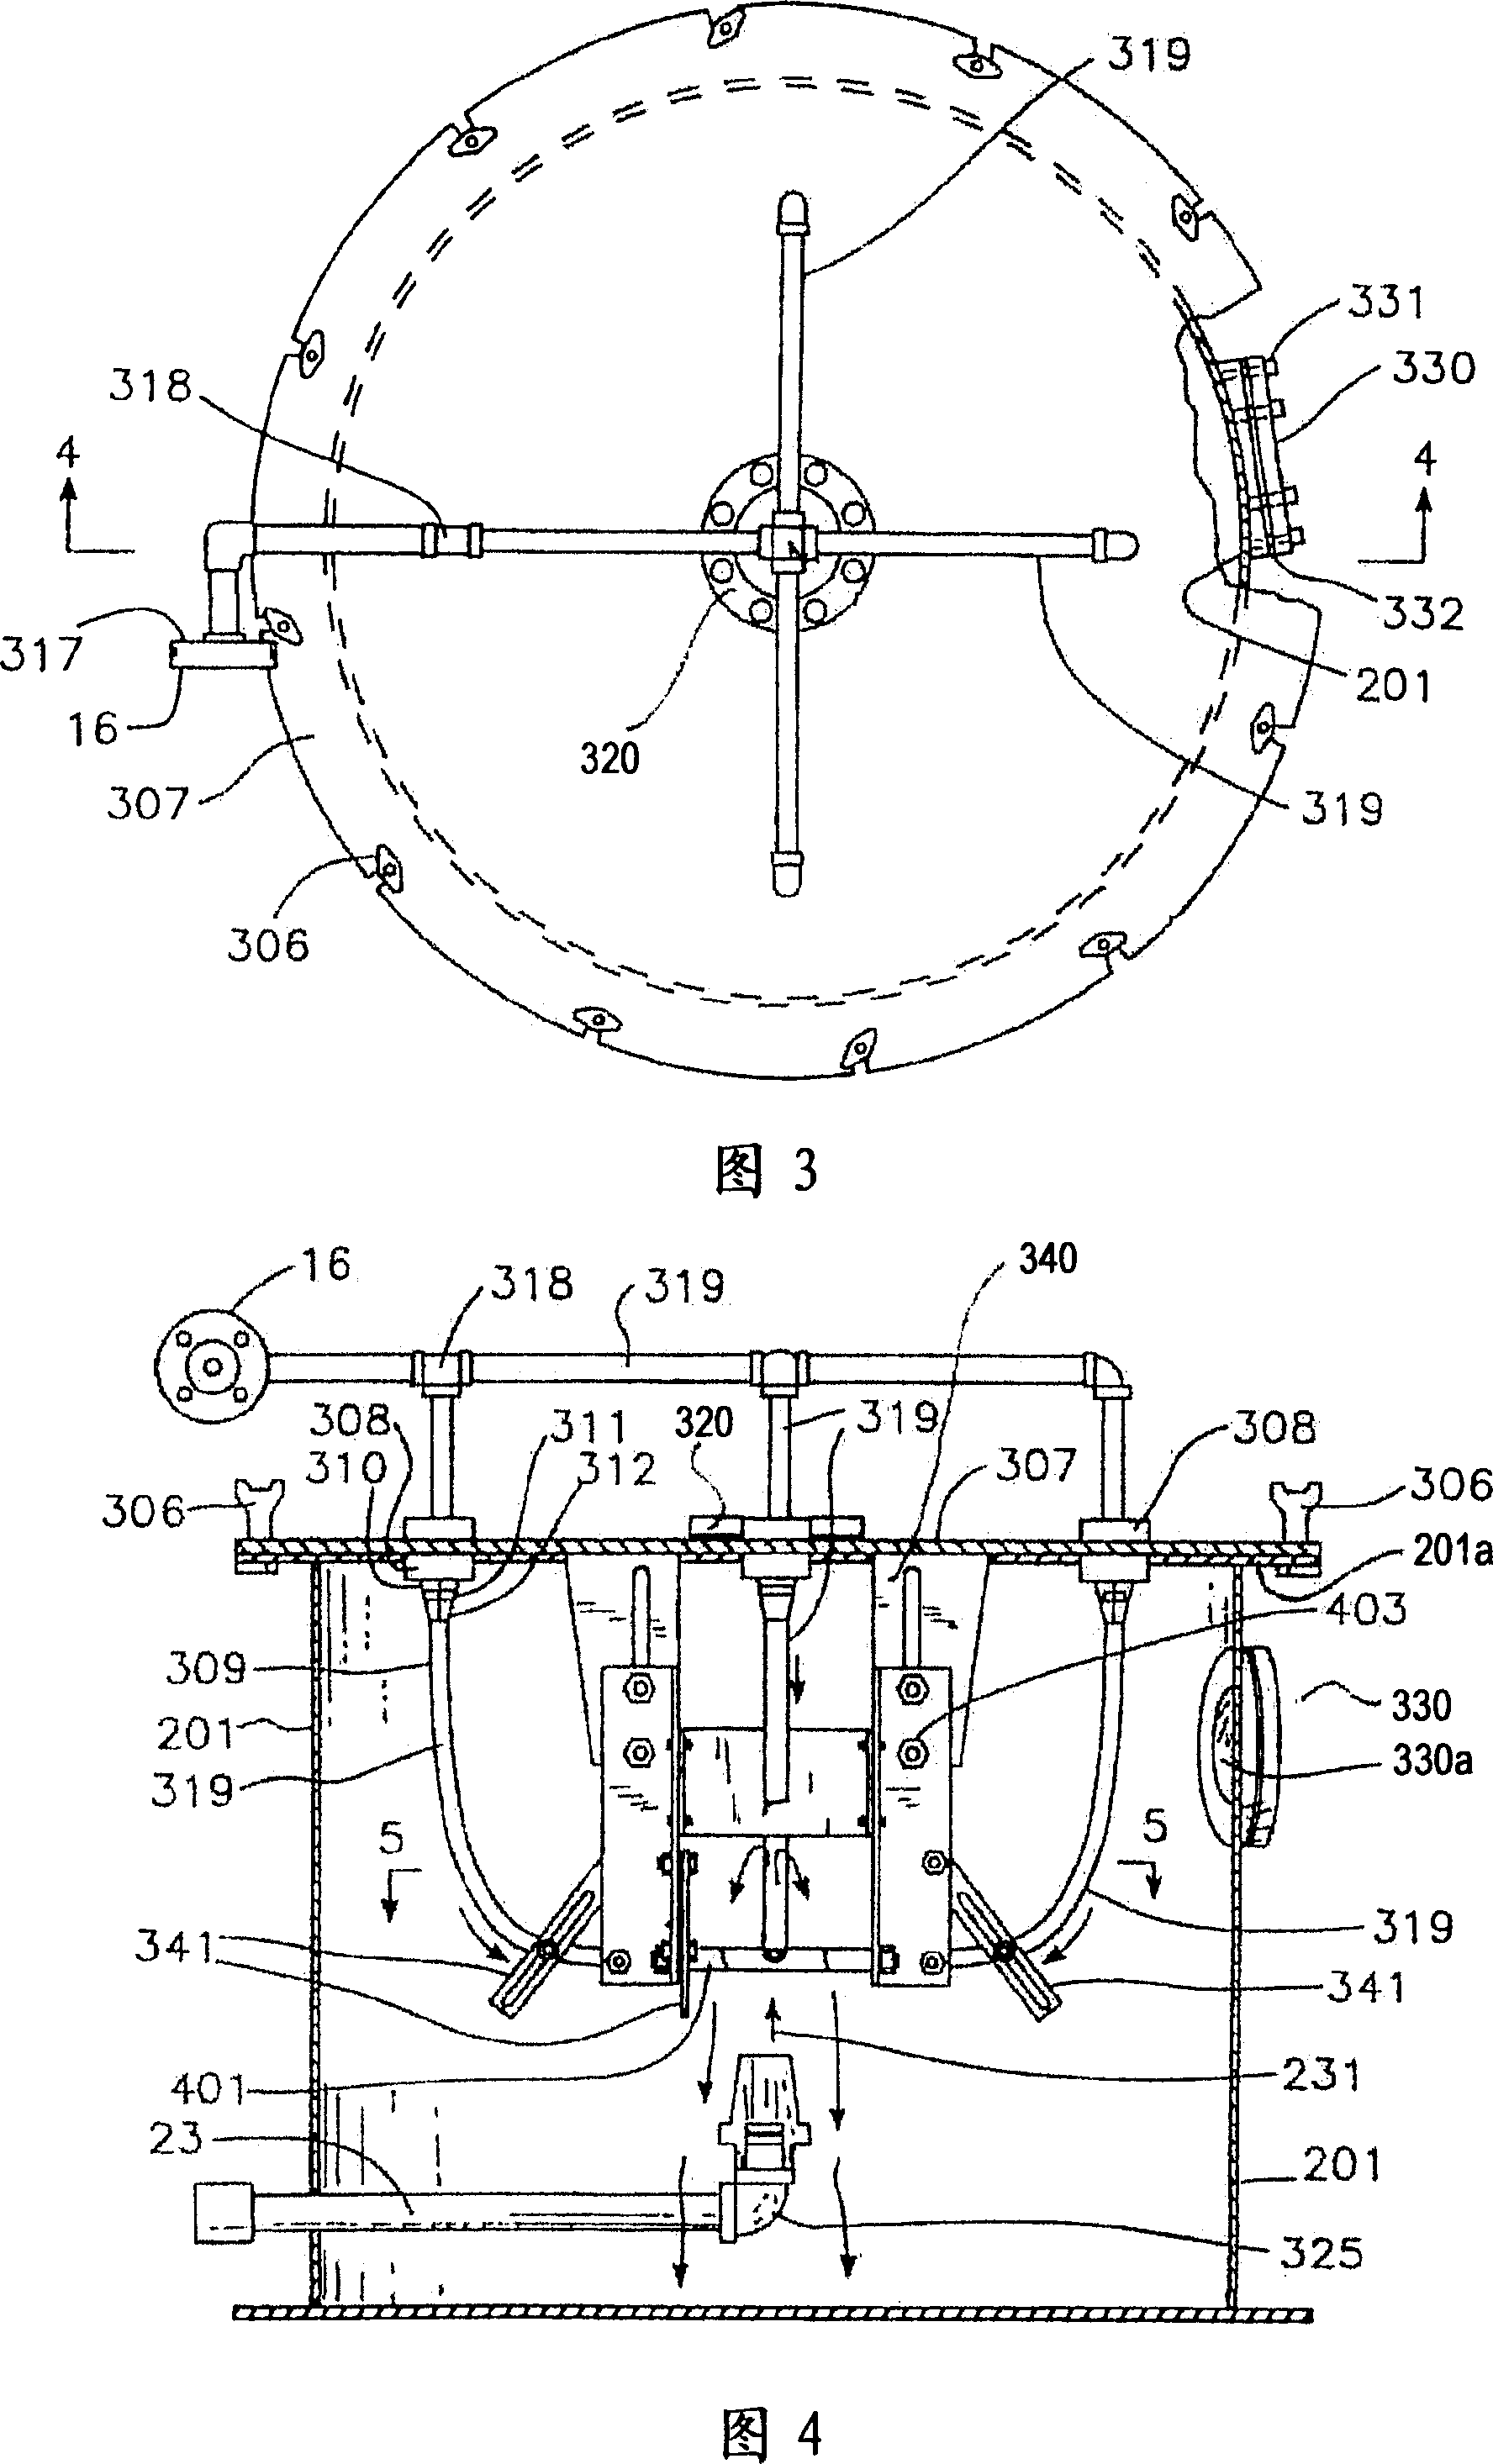 Apparatus and method for removing contaminants from fine grained soil, clay and silt